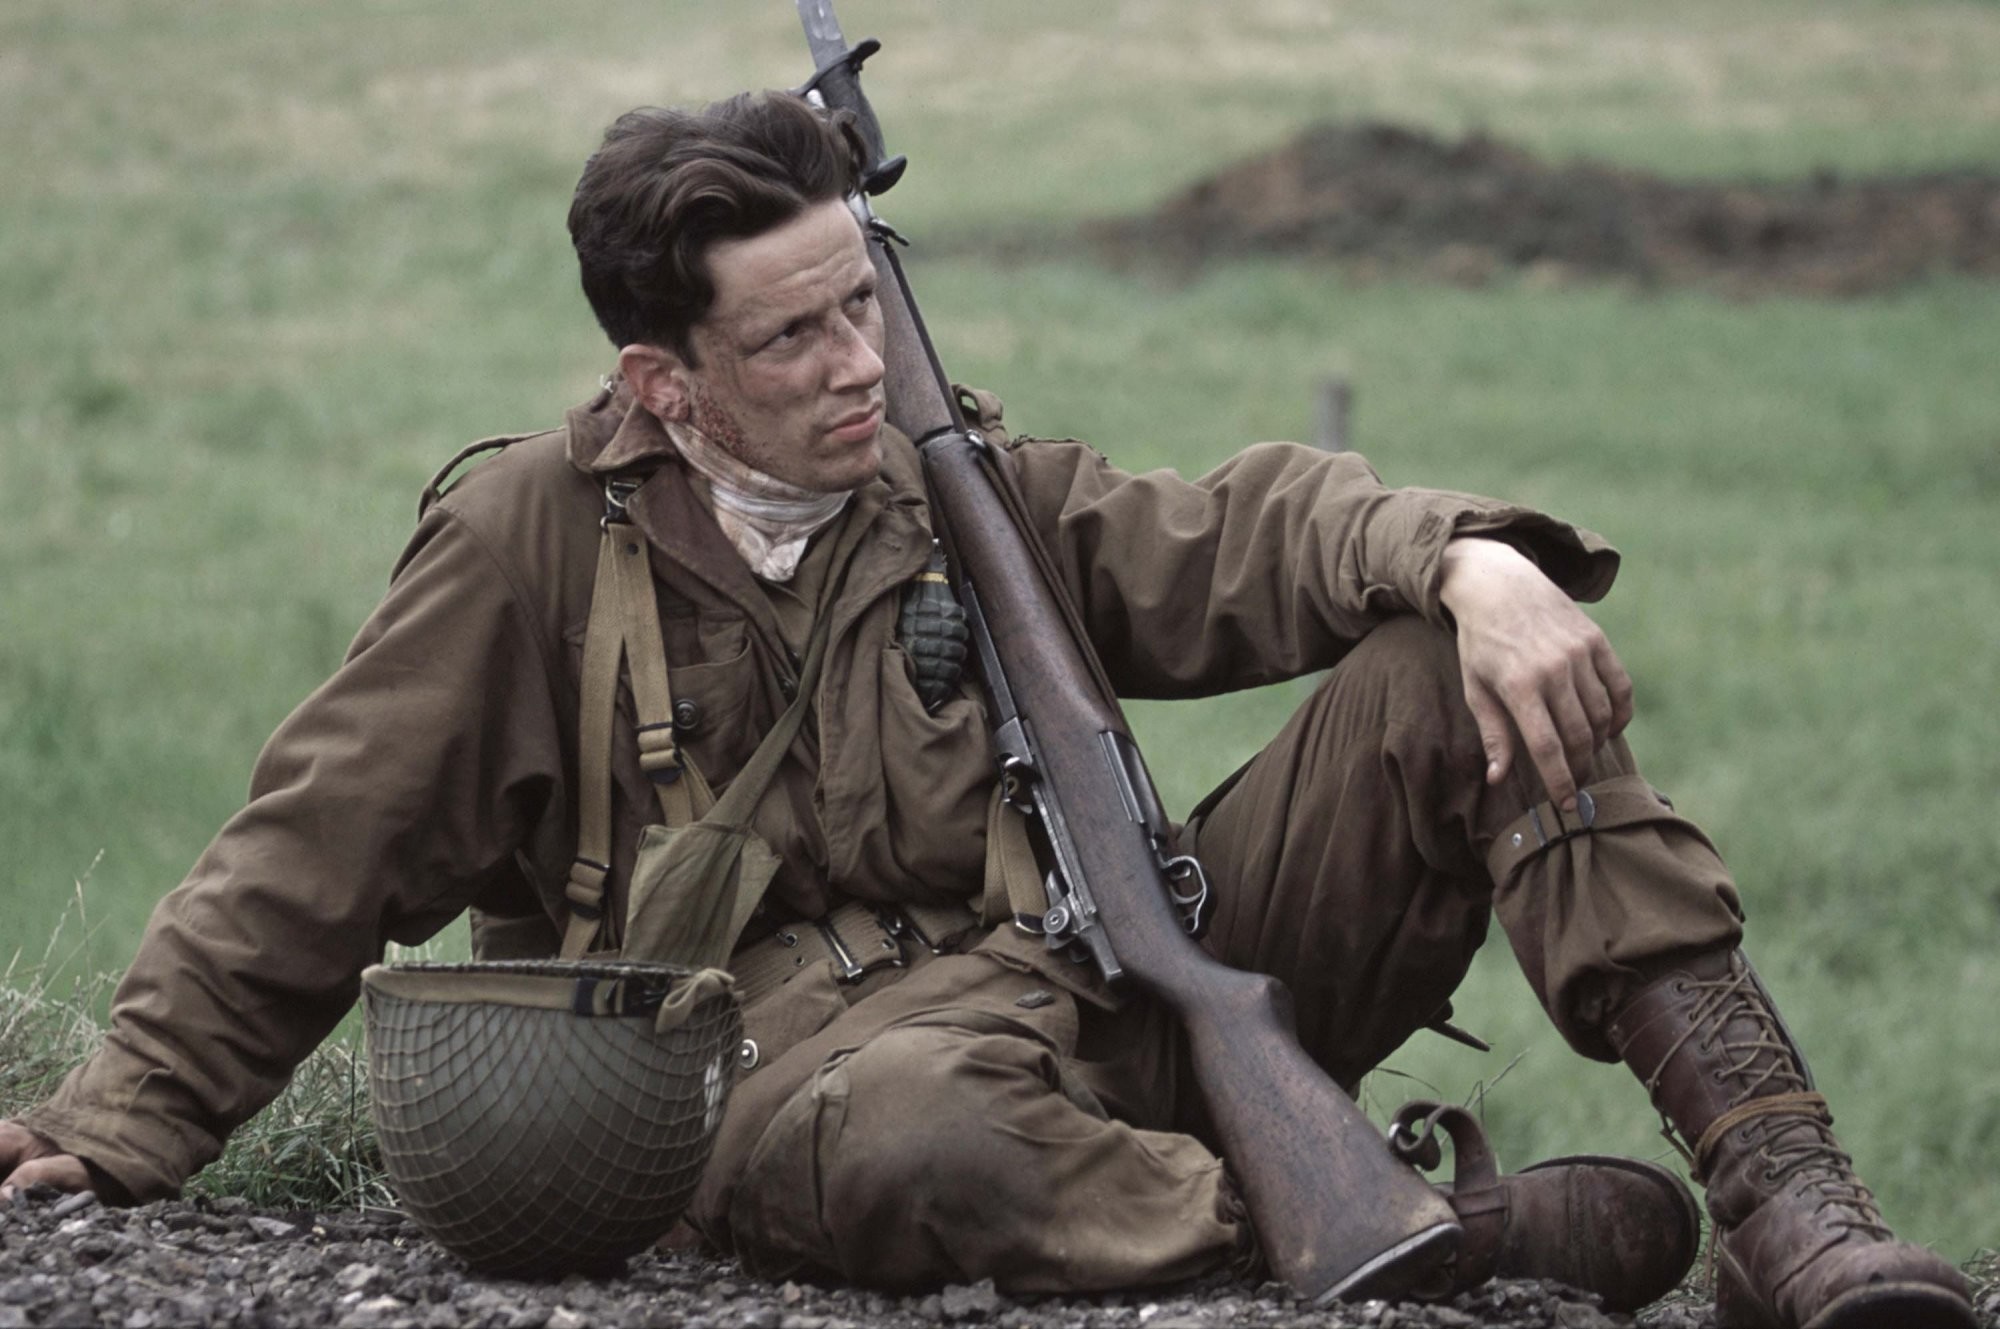 2000x1329 Ross McCall images Ross McCall in Band of Brothers HD wallpaper and  background photos